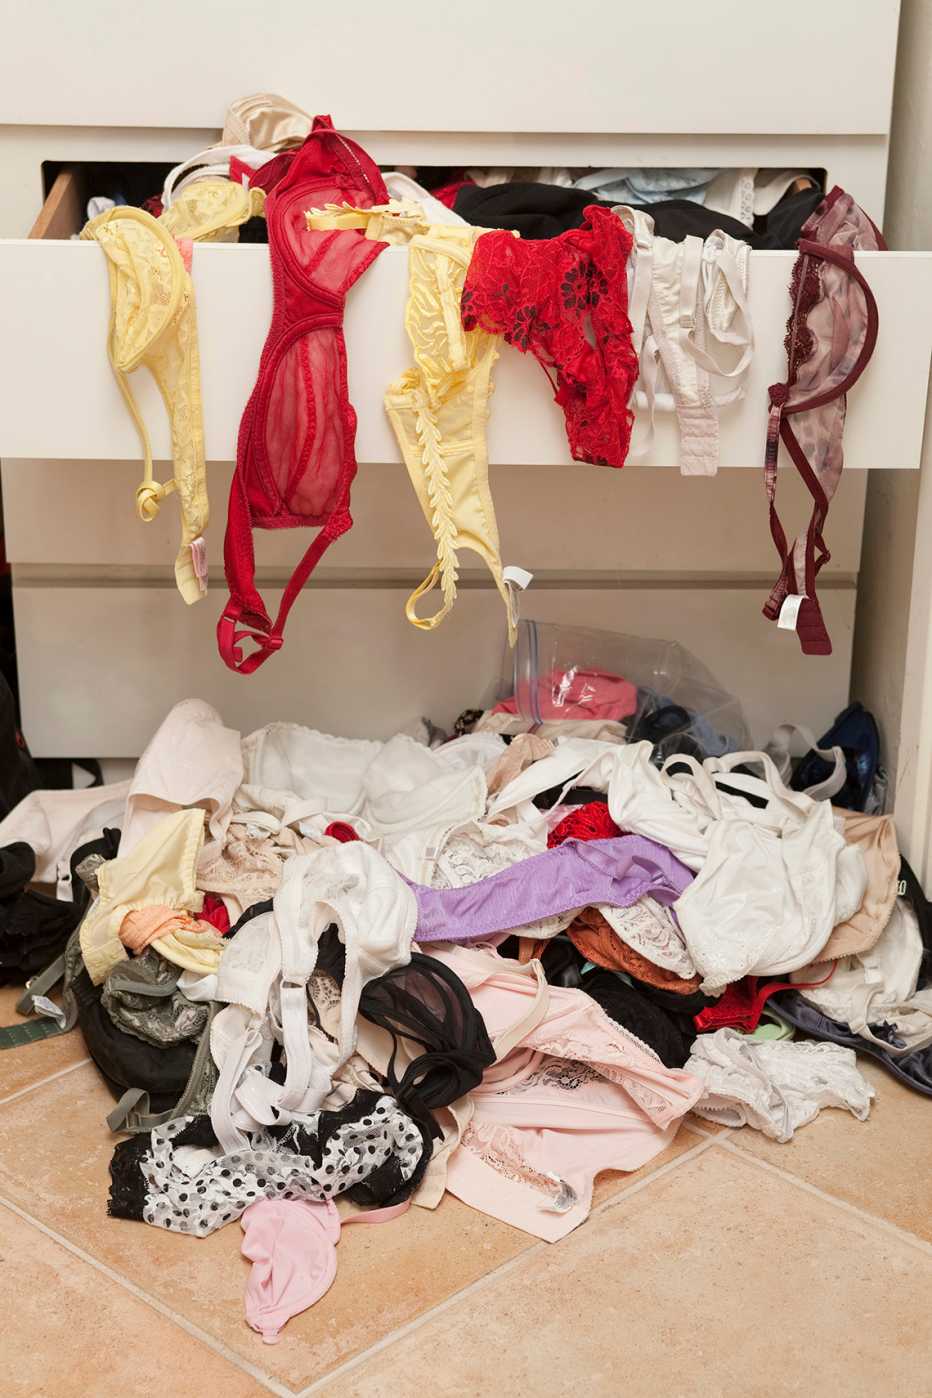 disorganized women's underwear piled on a floor and in a dresser drawer